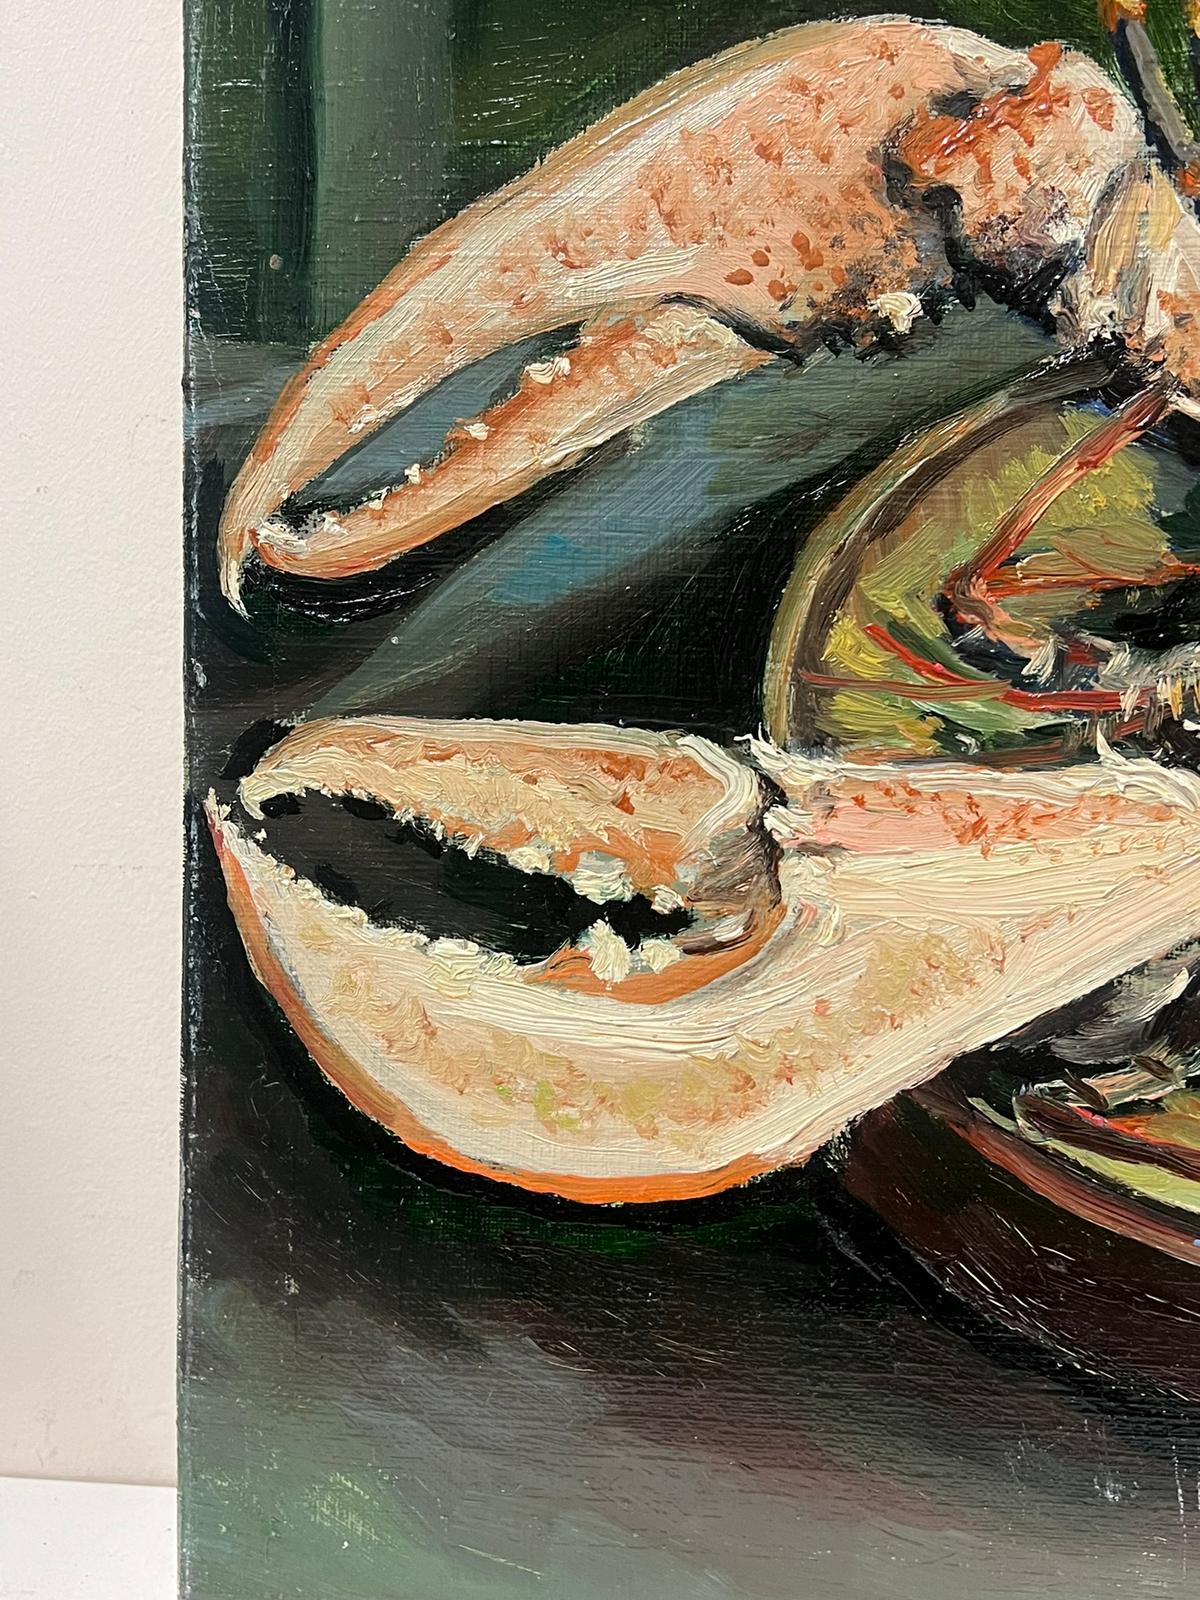 The Lobster
by Georges Bordonave (French contemporary)  
signed oil painting on canvas, unframed
dated 1978
canvas: 15 x 18 inches
condition: very good
provenance: from a large private collection of this artists work, western Paris, France. 